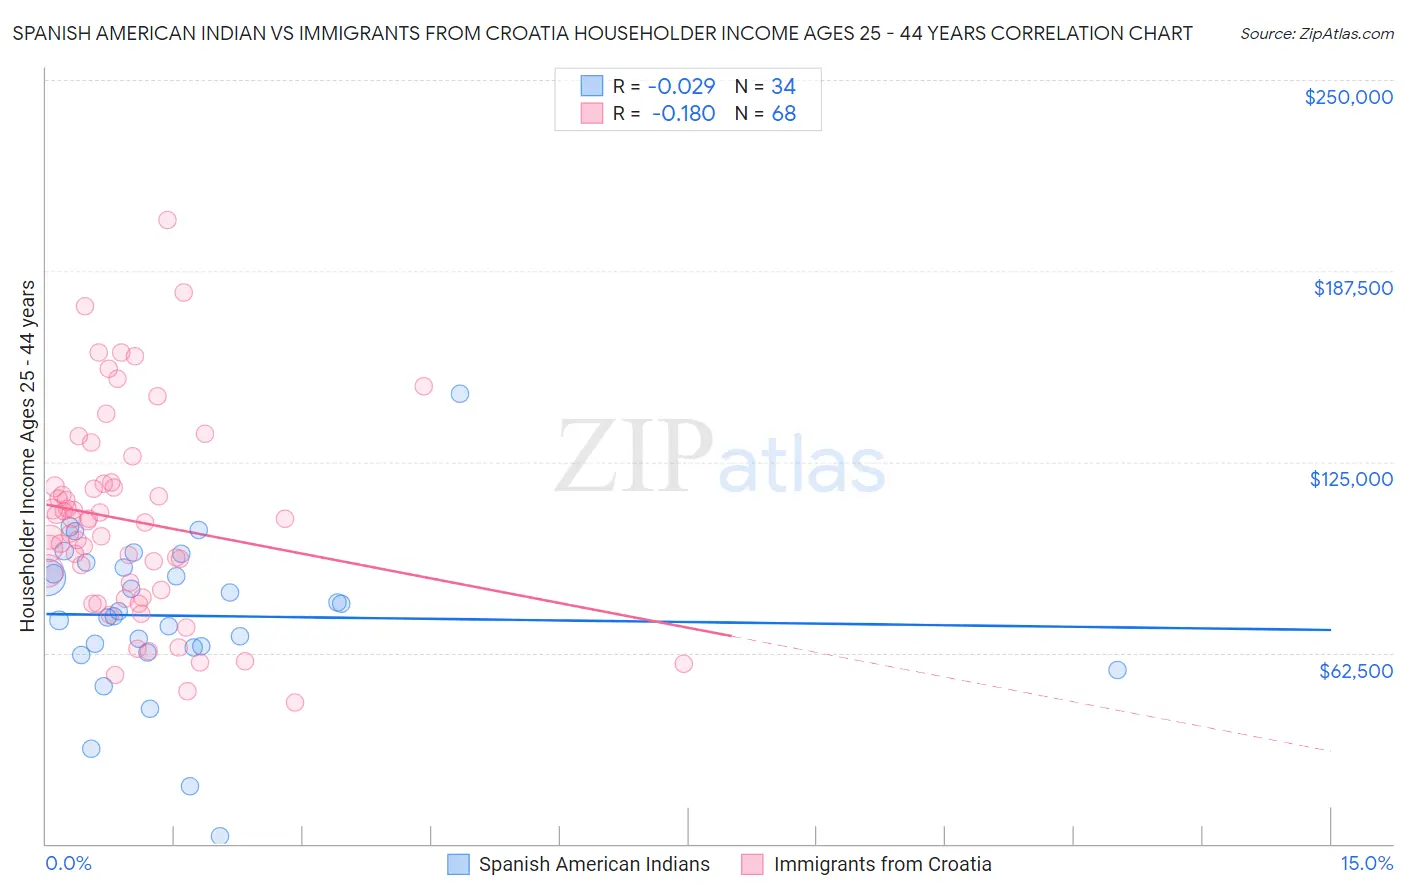 Spanish American Indian vs Immigrants from Croatia Householder Income Ages 25 - 44 years